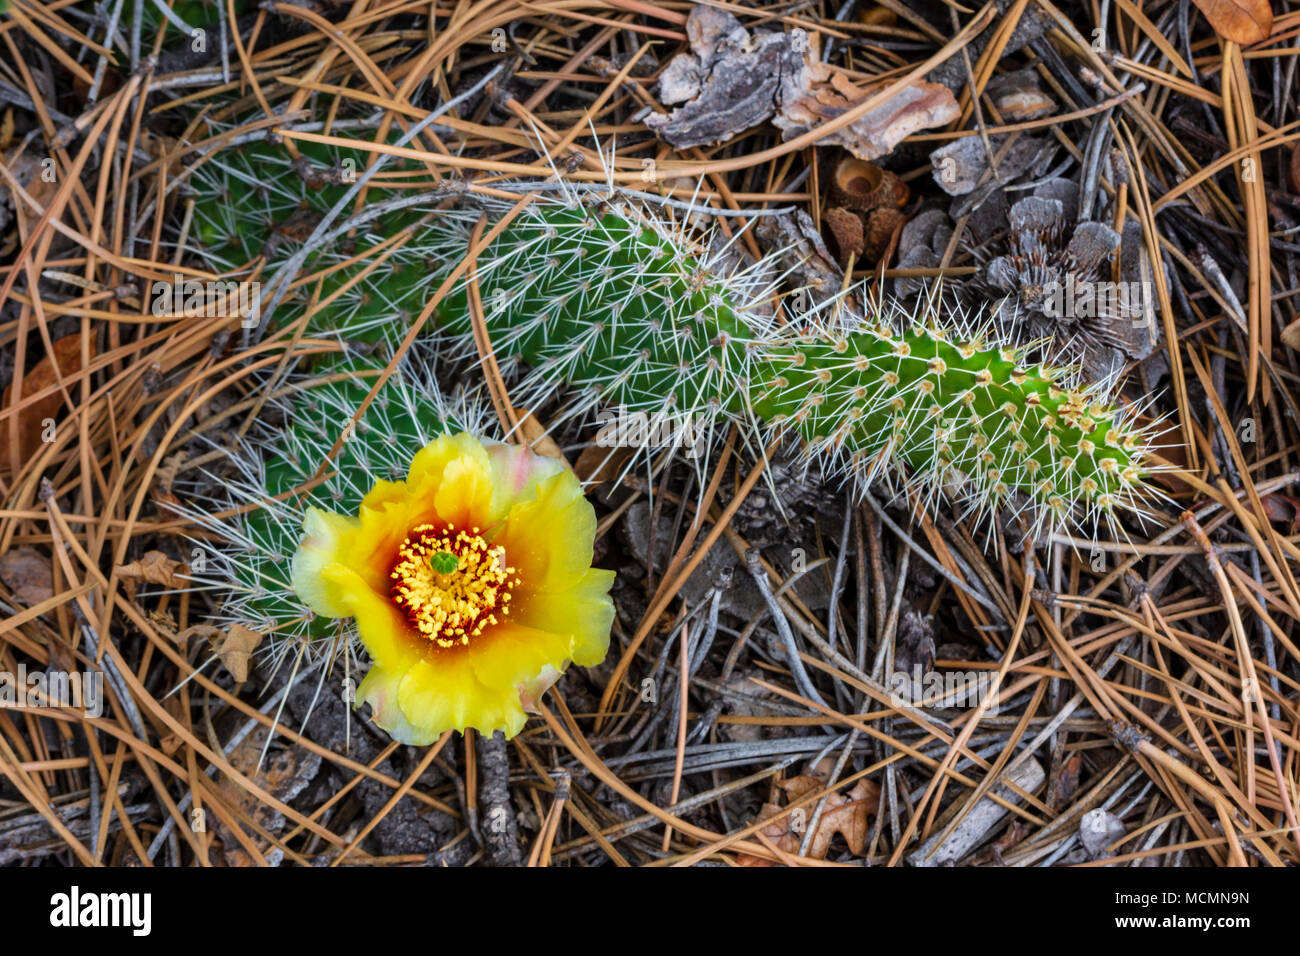 Prickly Pear Cactus in bloom among pine needles of forest floor, Castle Rock Colorado US. Stock Photo